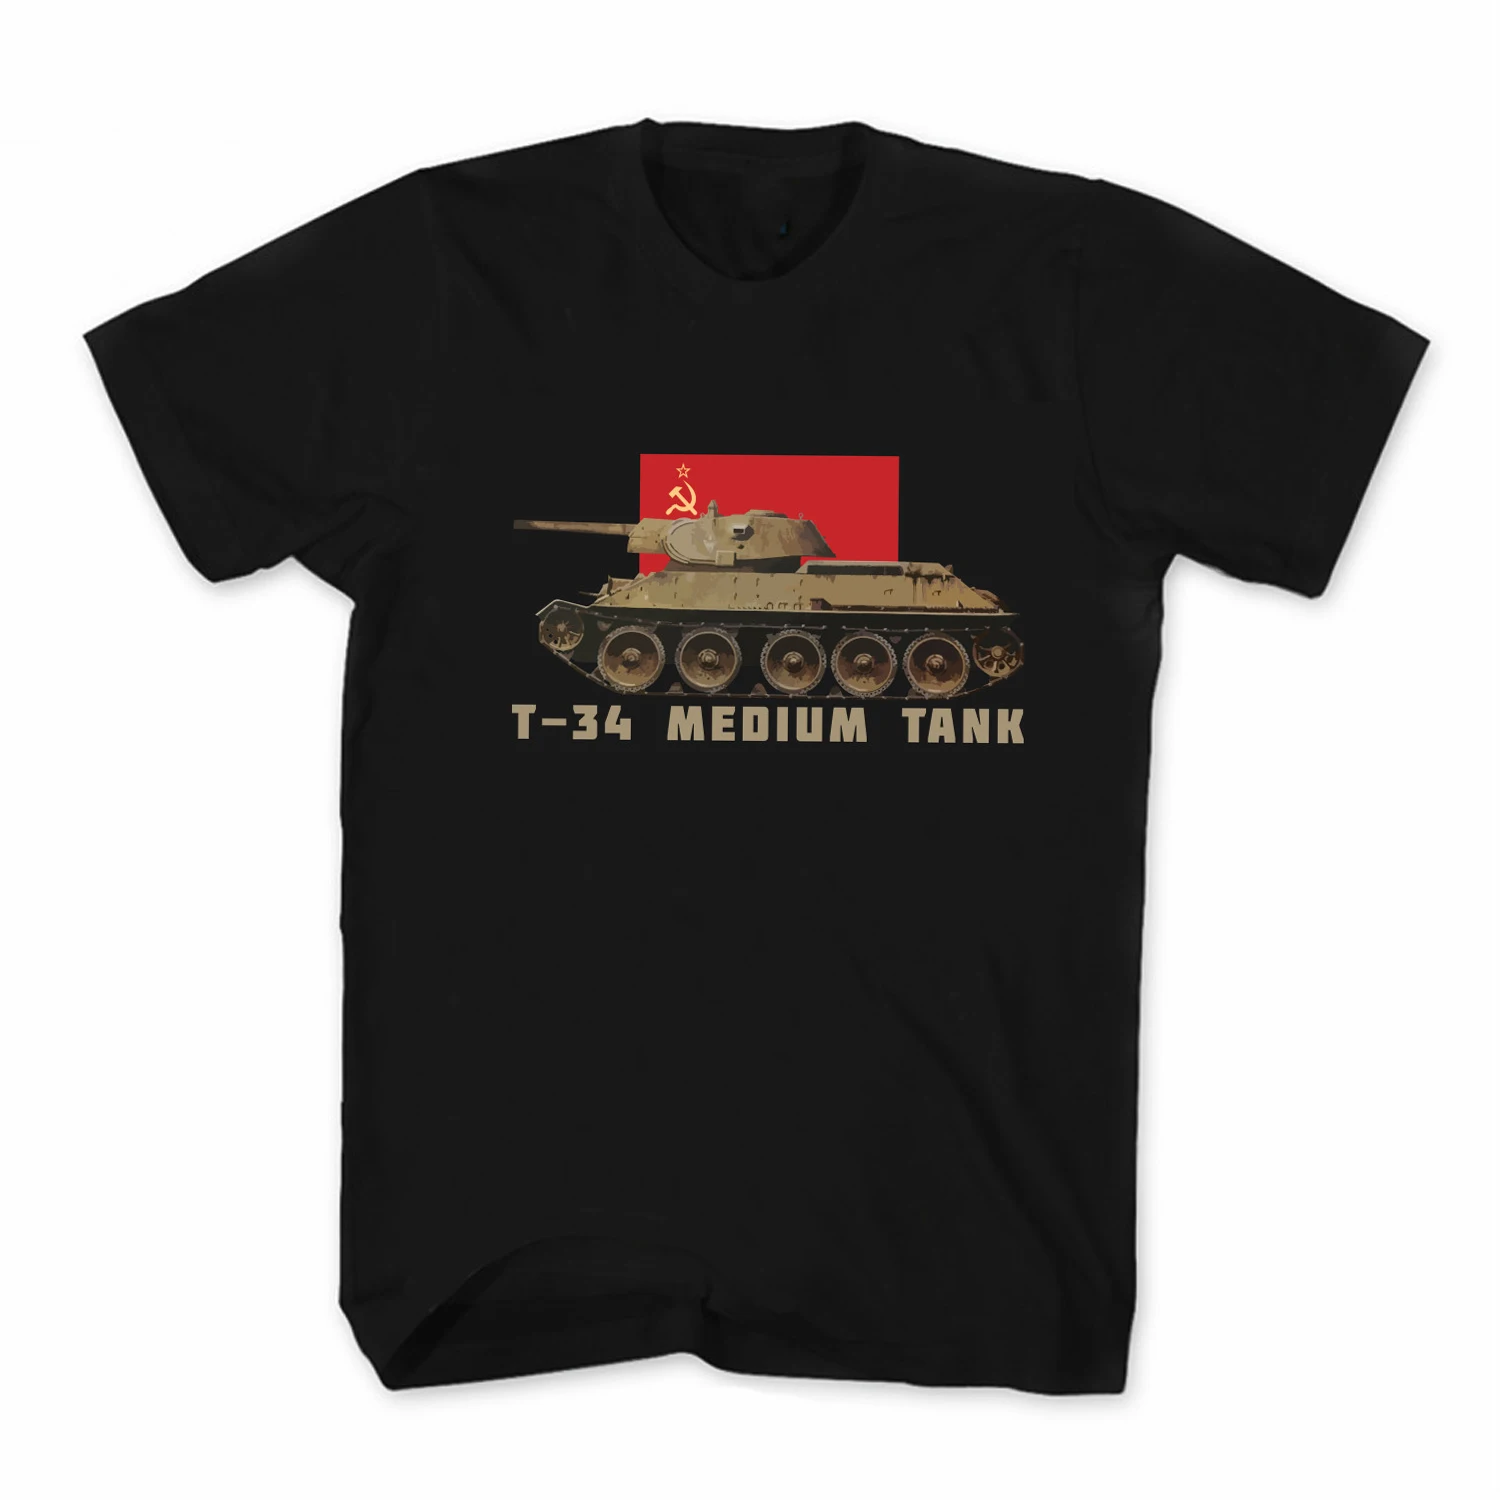 

Russian T-34 Tank WWII Soviet Union military Army Flag Tanks Graphic T-Shirt. Cotton Short Sleeve O-Neck Men's T Shirt New S-3XL